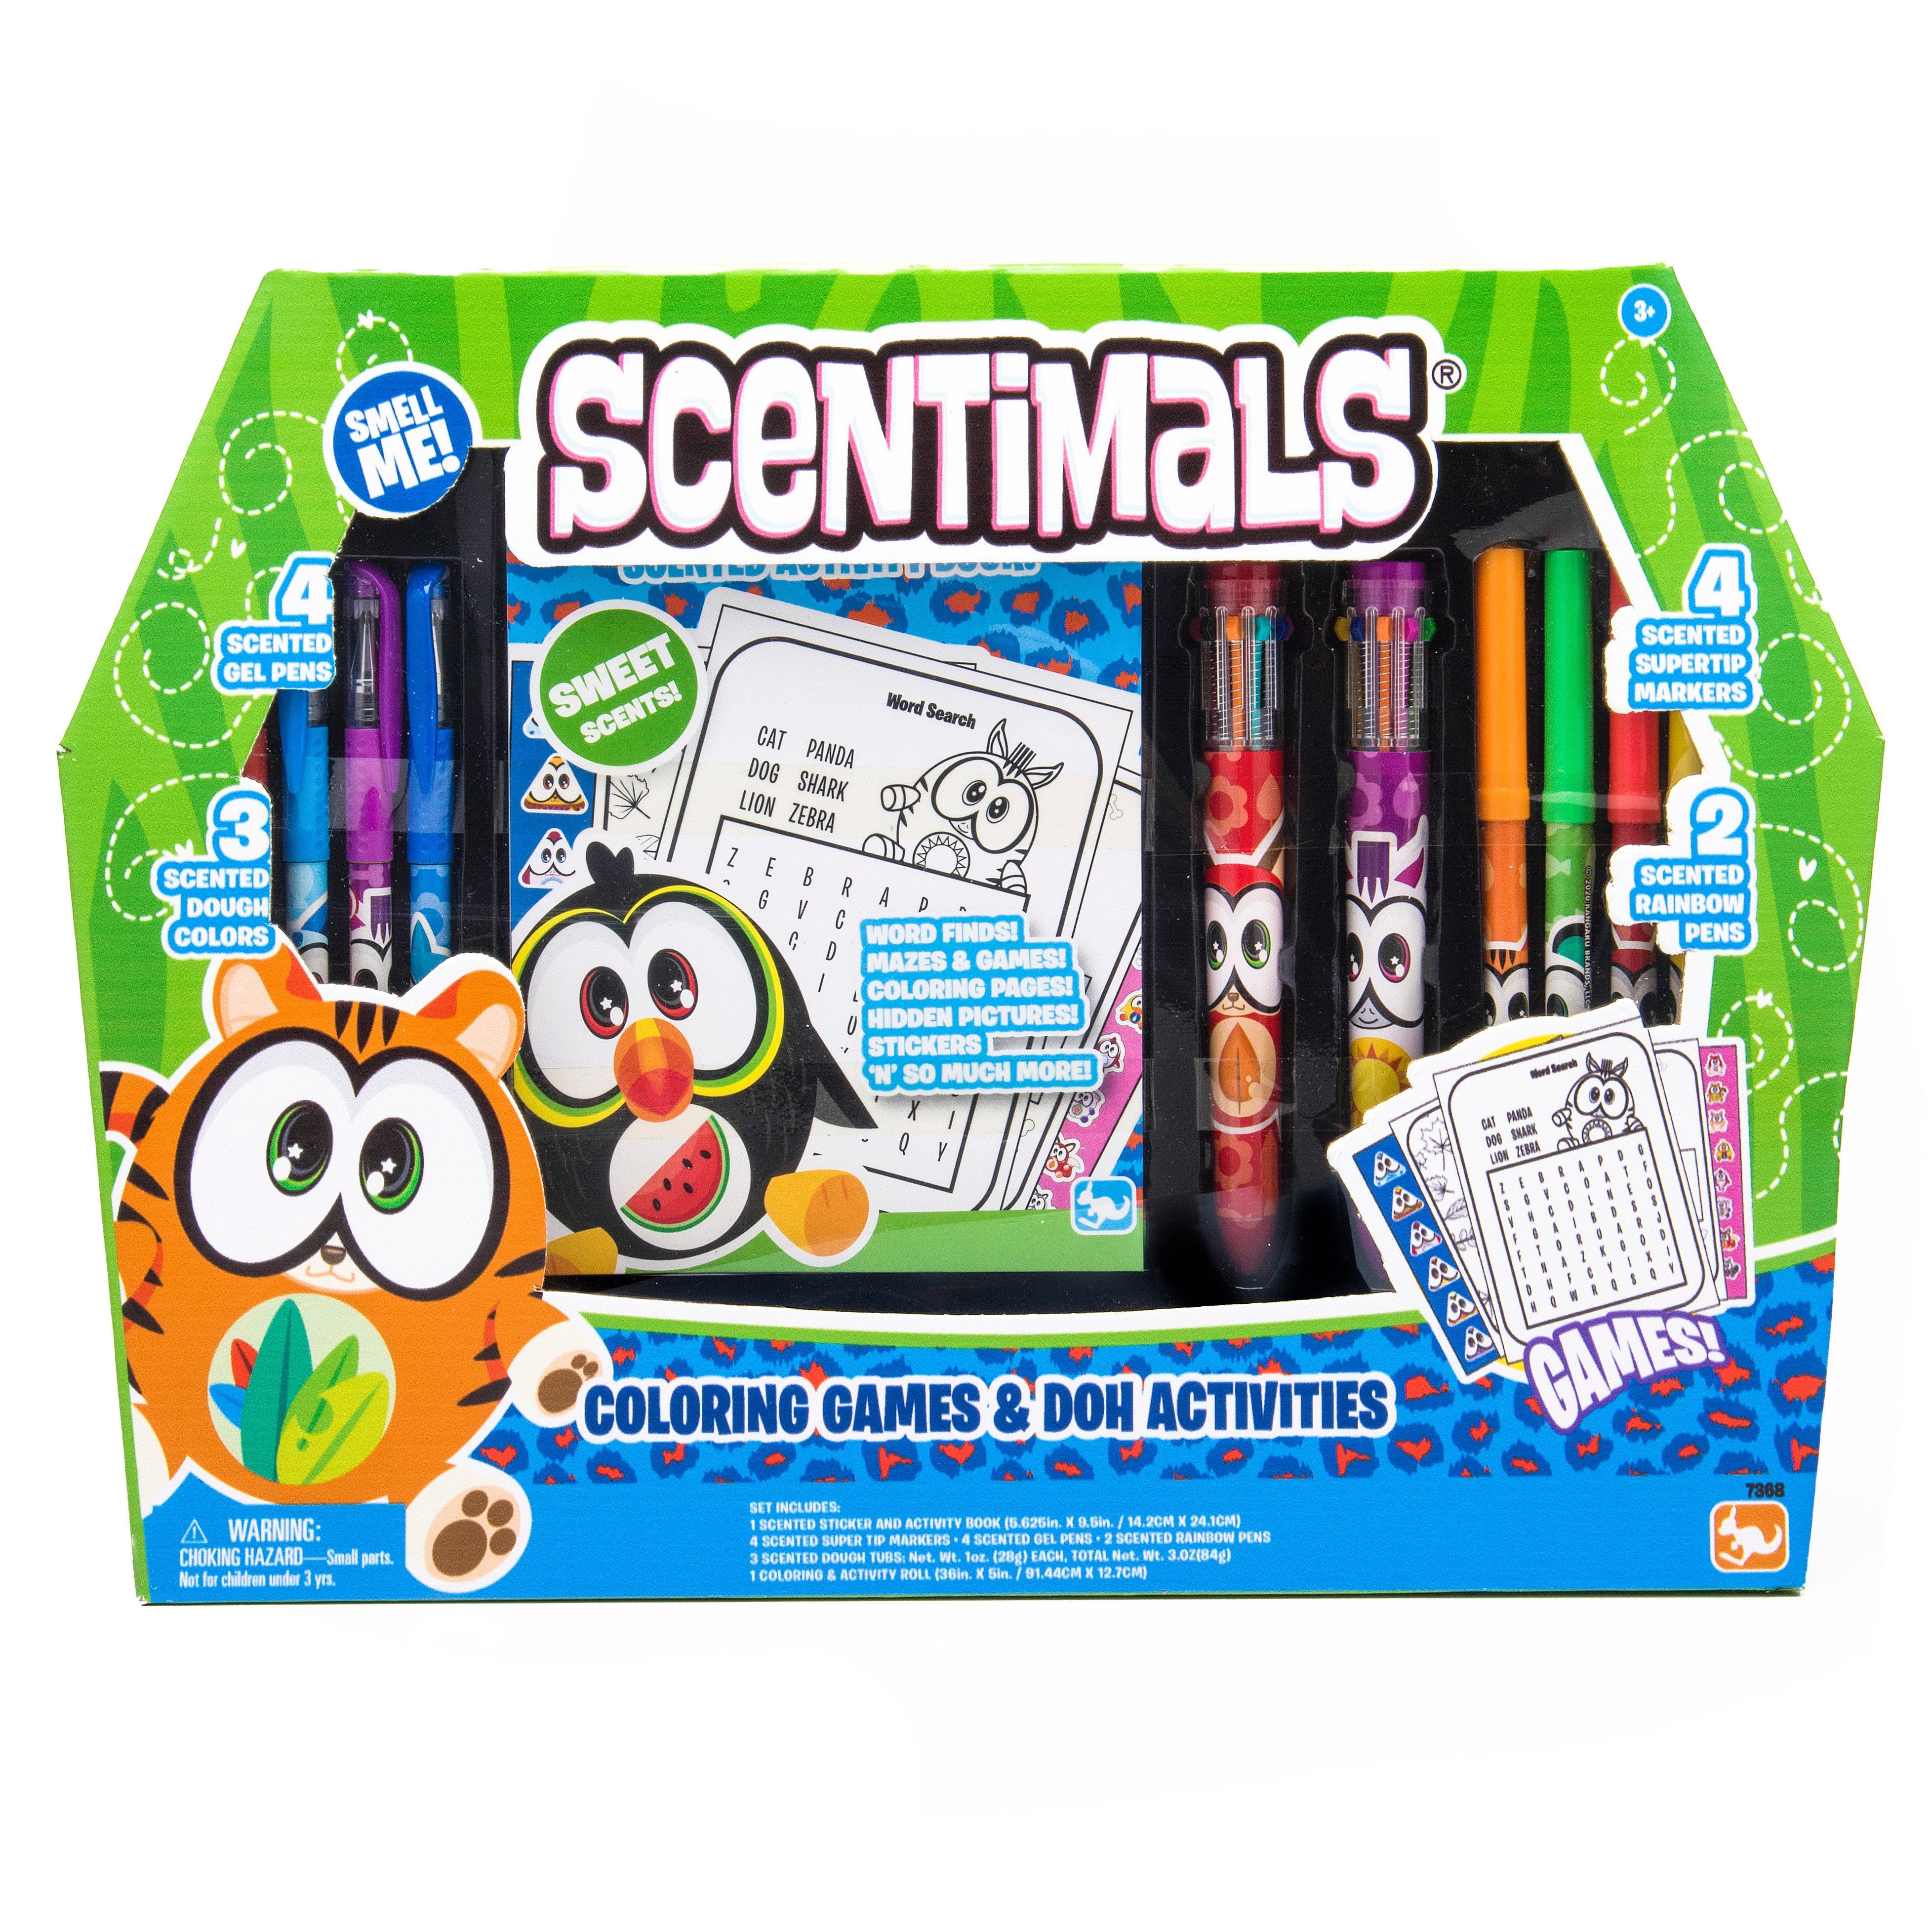 Scentimals 6ct Double Ended Supertip Markers